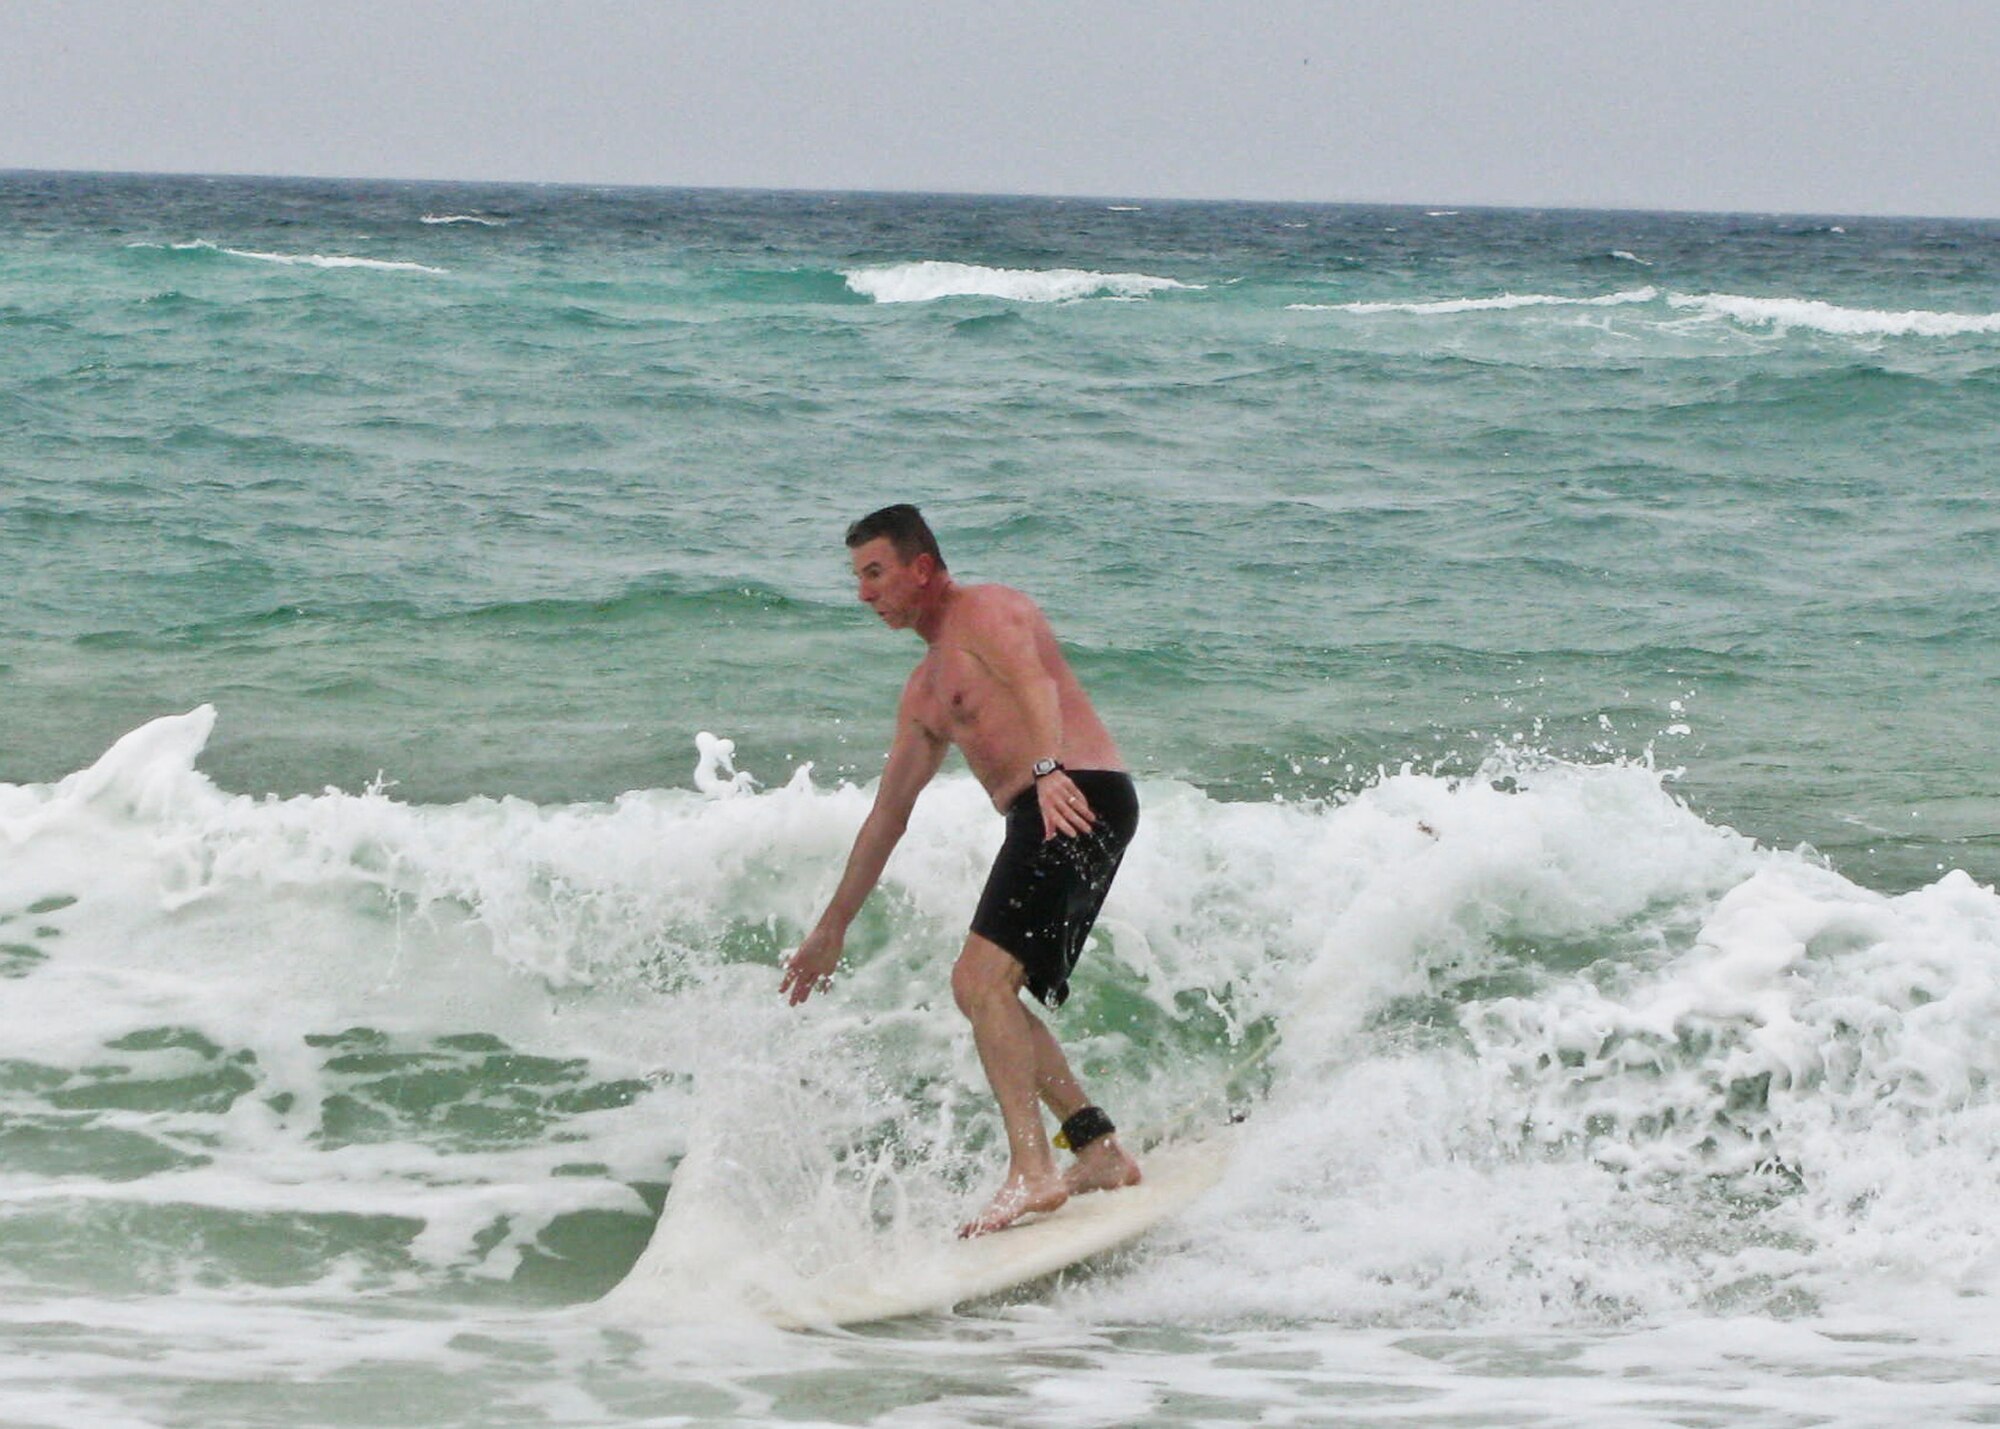 Chief Master Sgt. Tom Westermeyer, 96th Air Base Wing command chief, rides a wave at the Okaloosa Island Boardwalk May 13.  The chief will end his 30-year career at Eglin in June, when he officially retires from Air Force active duty.  (U.S. Air Force photo/Irene Freiberg.)